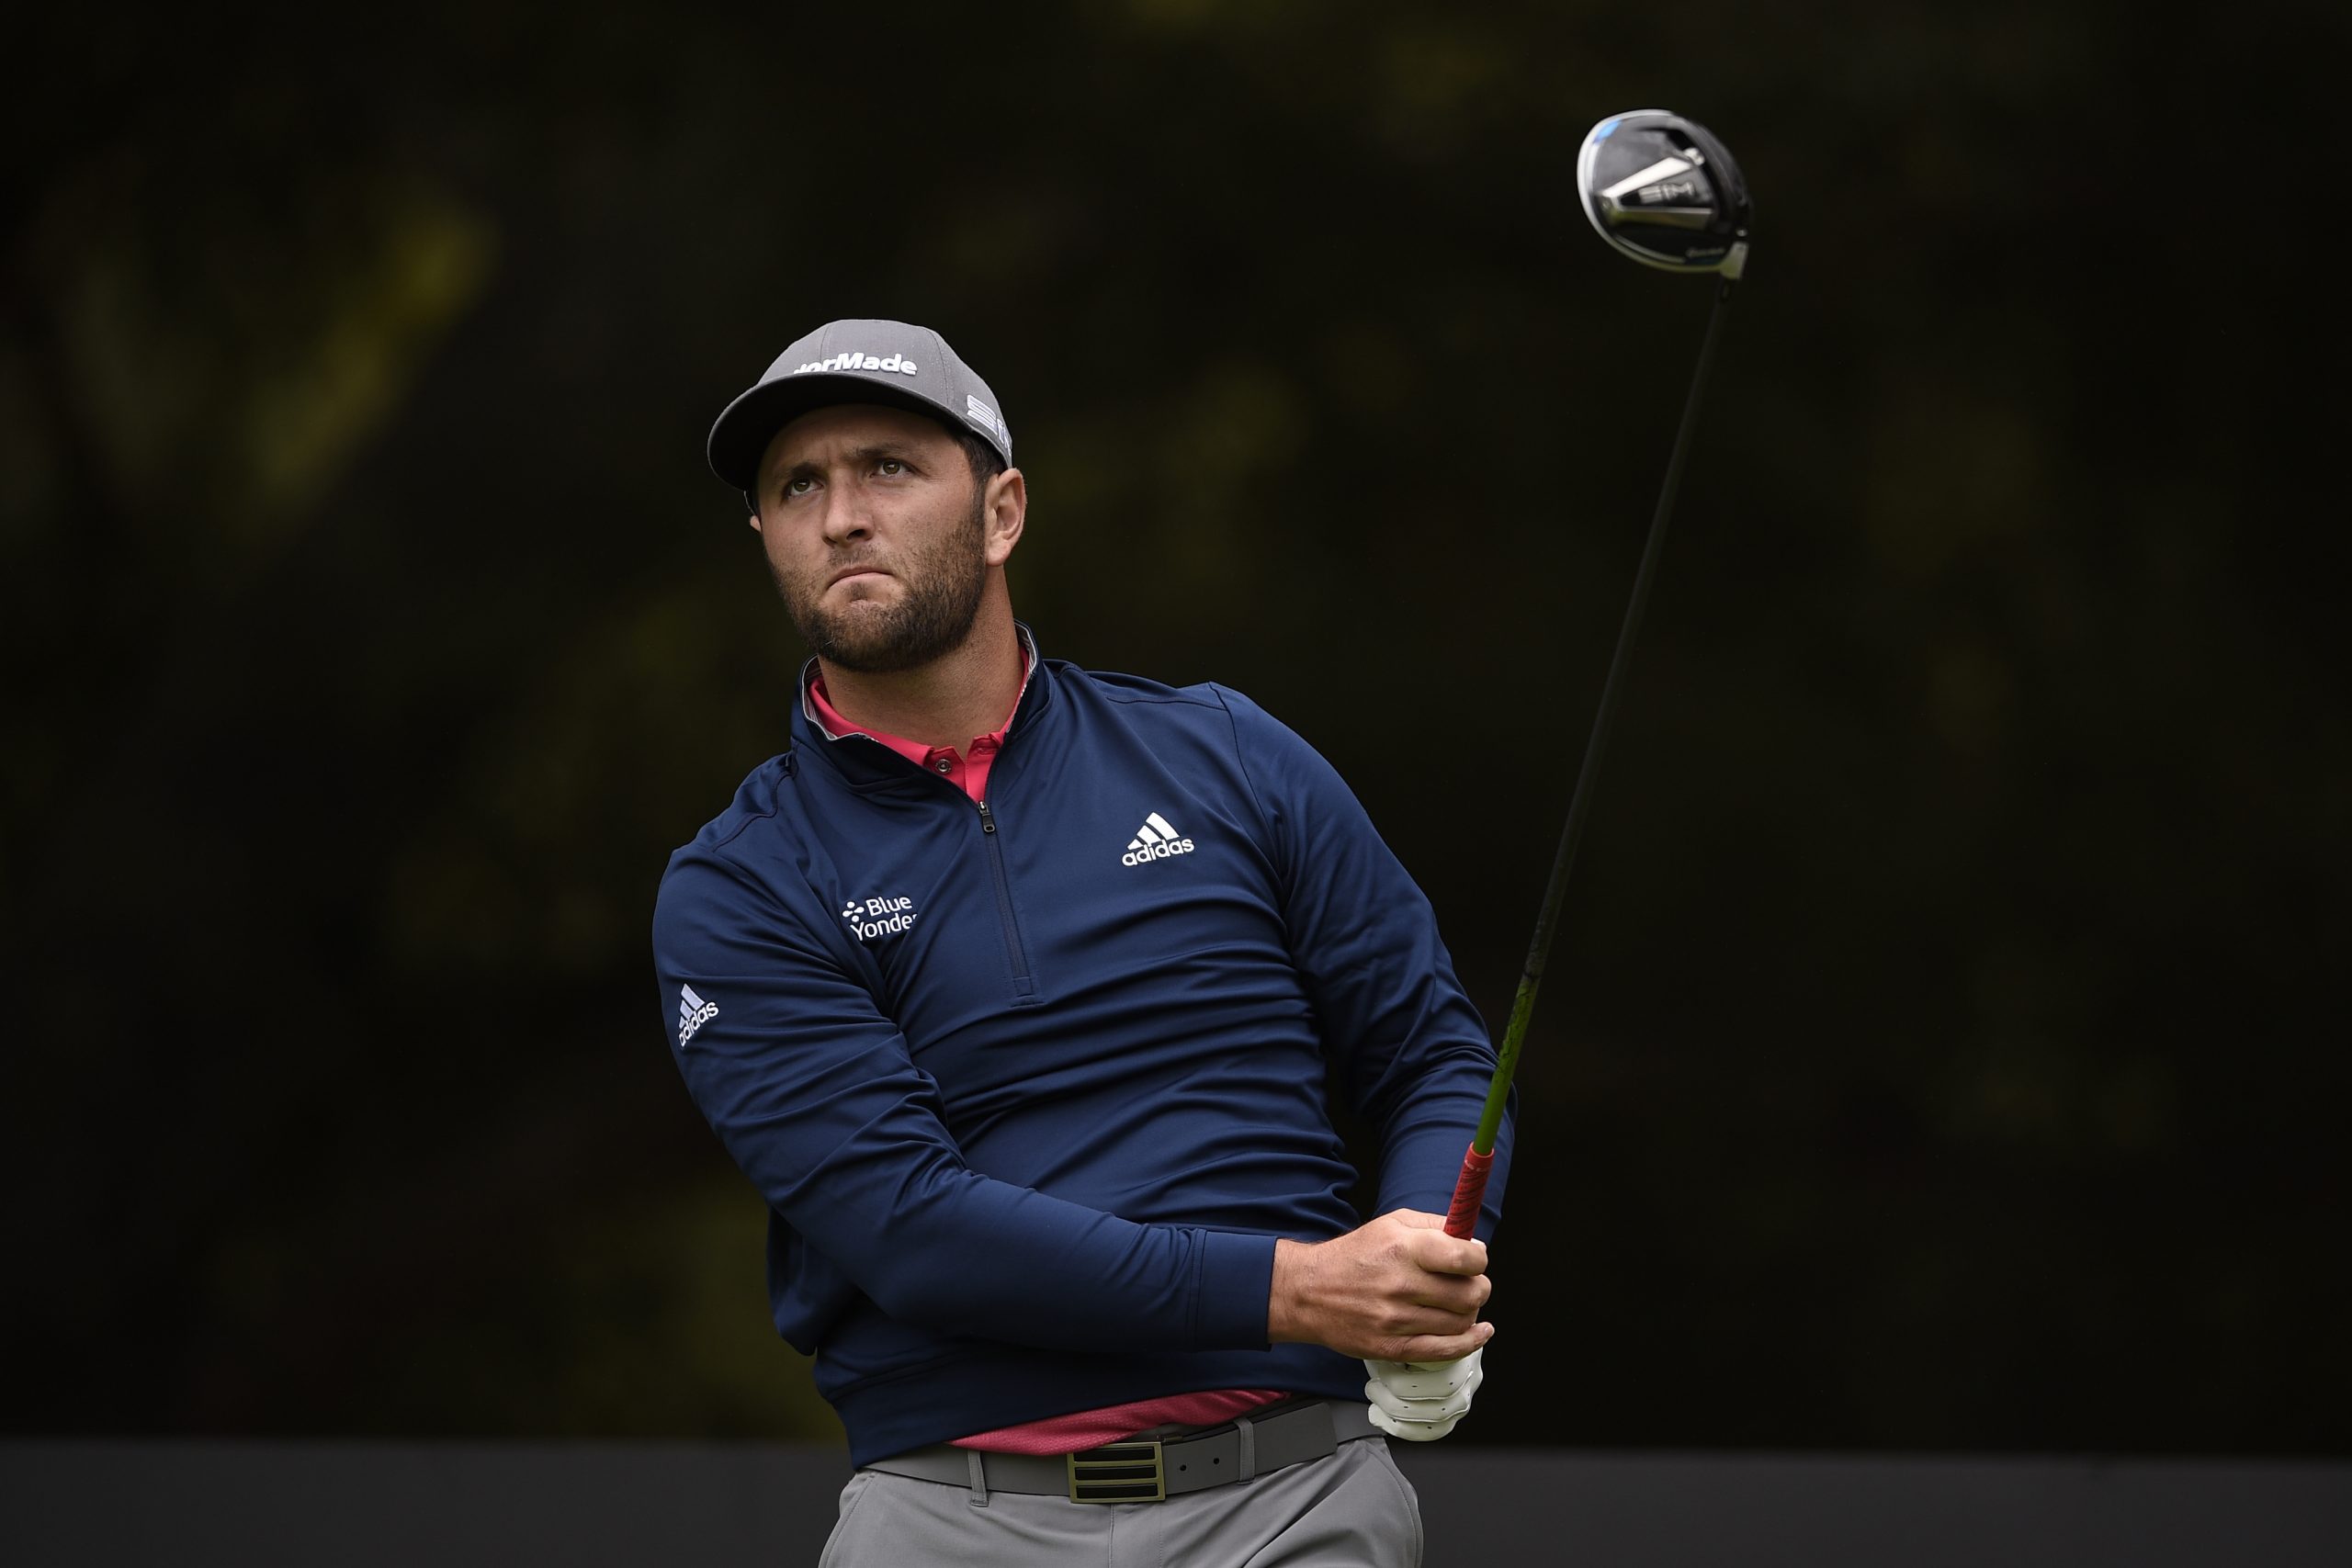 Best 3-ball bets for Thursday's opening round at British Open | Pickswise